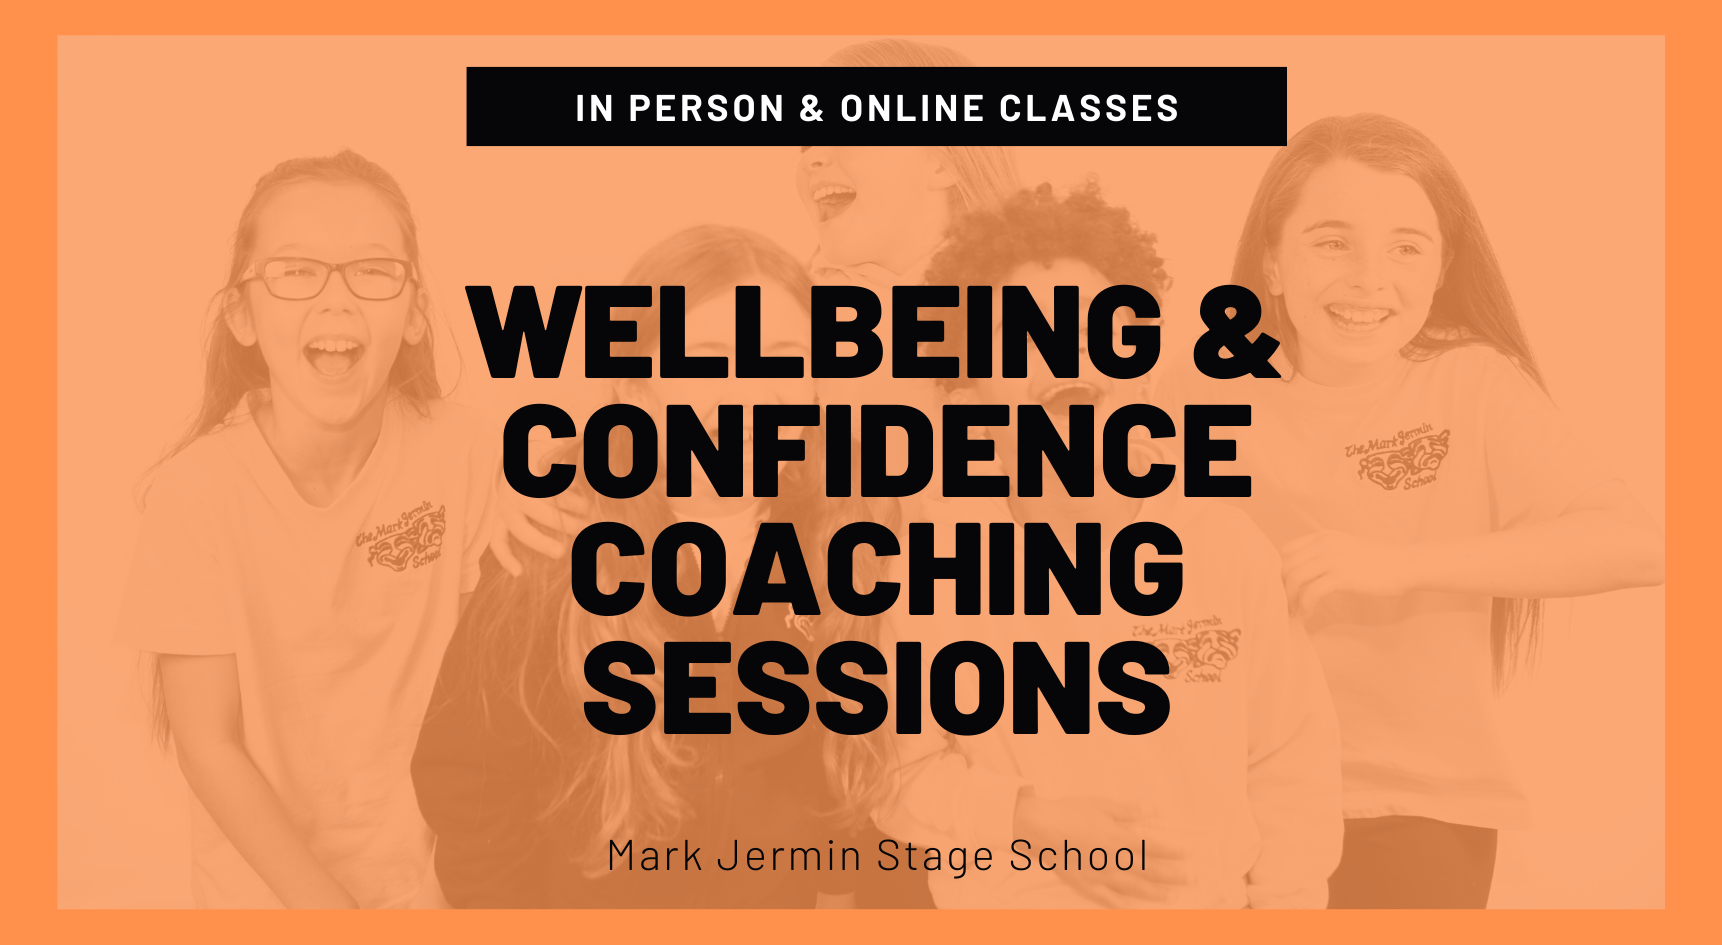 Confidence & Wellbeing sessions at Mark Jermin